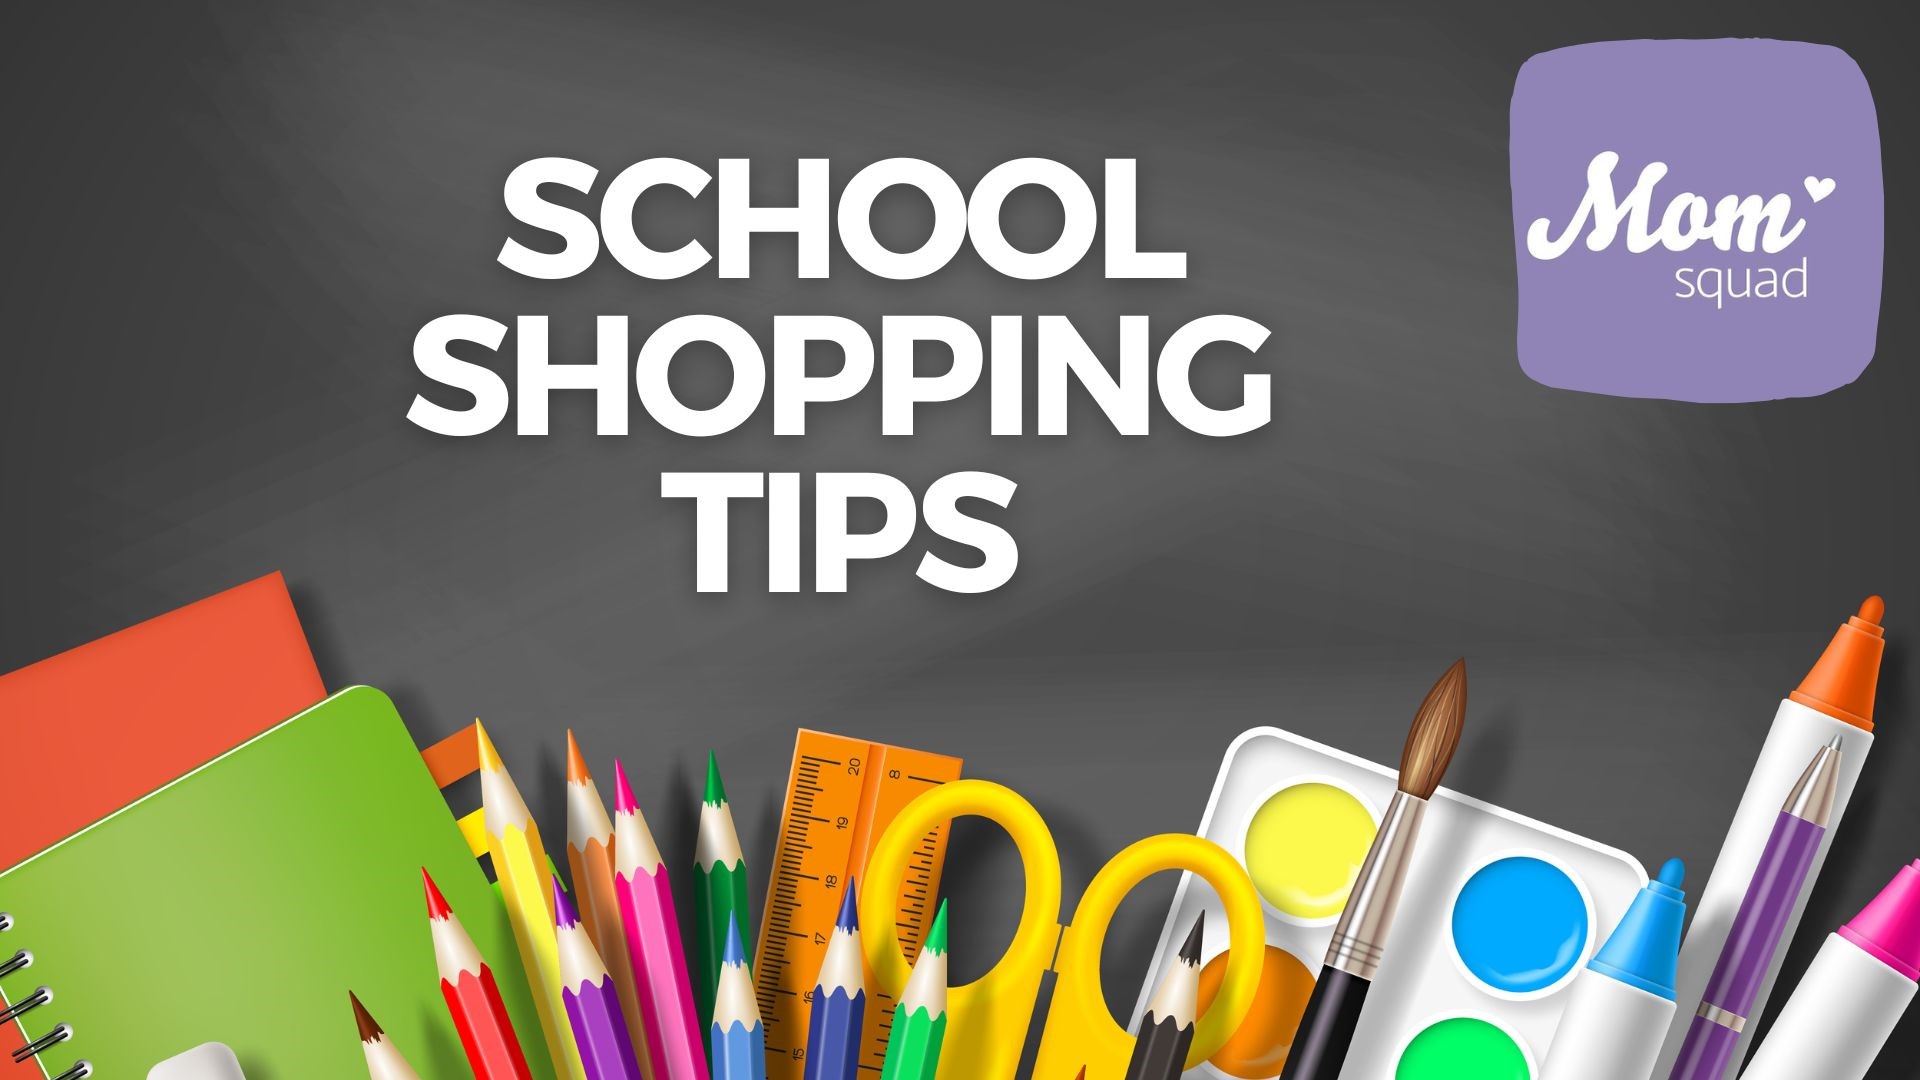 Maureen Kyle prices compares school supplies at different retailers and shares tips on how to tackle back-to-school shopping.